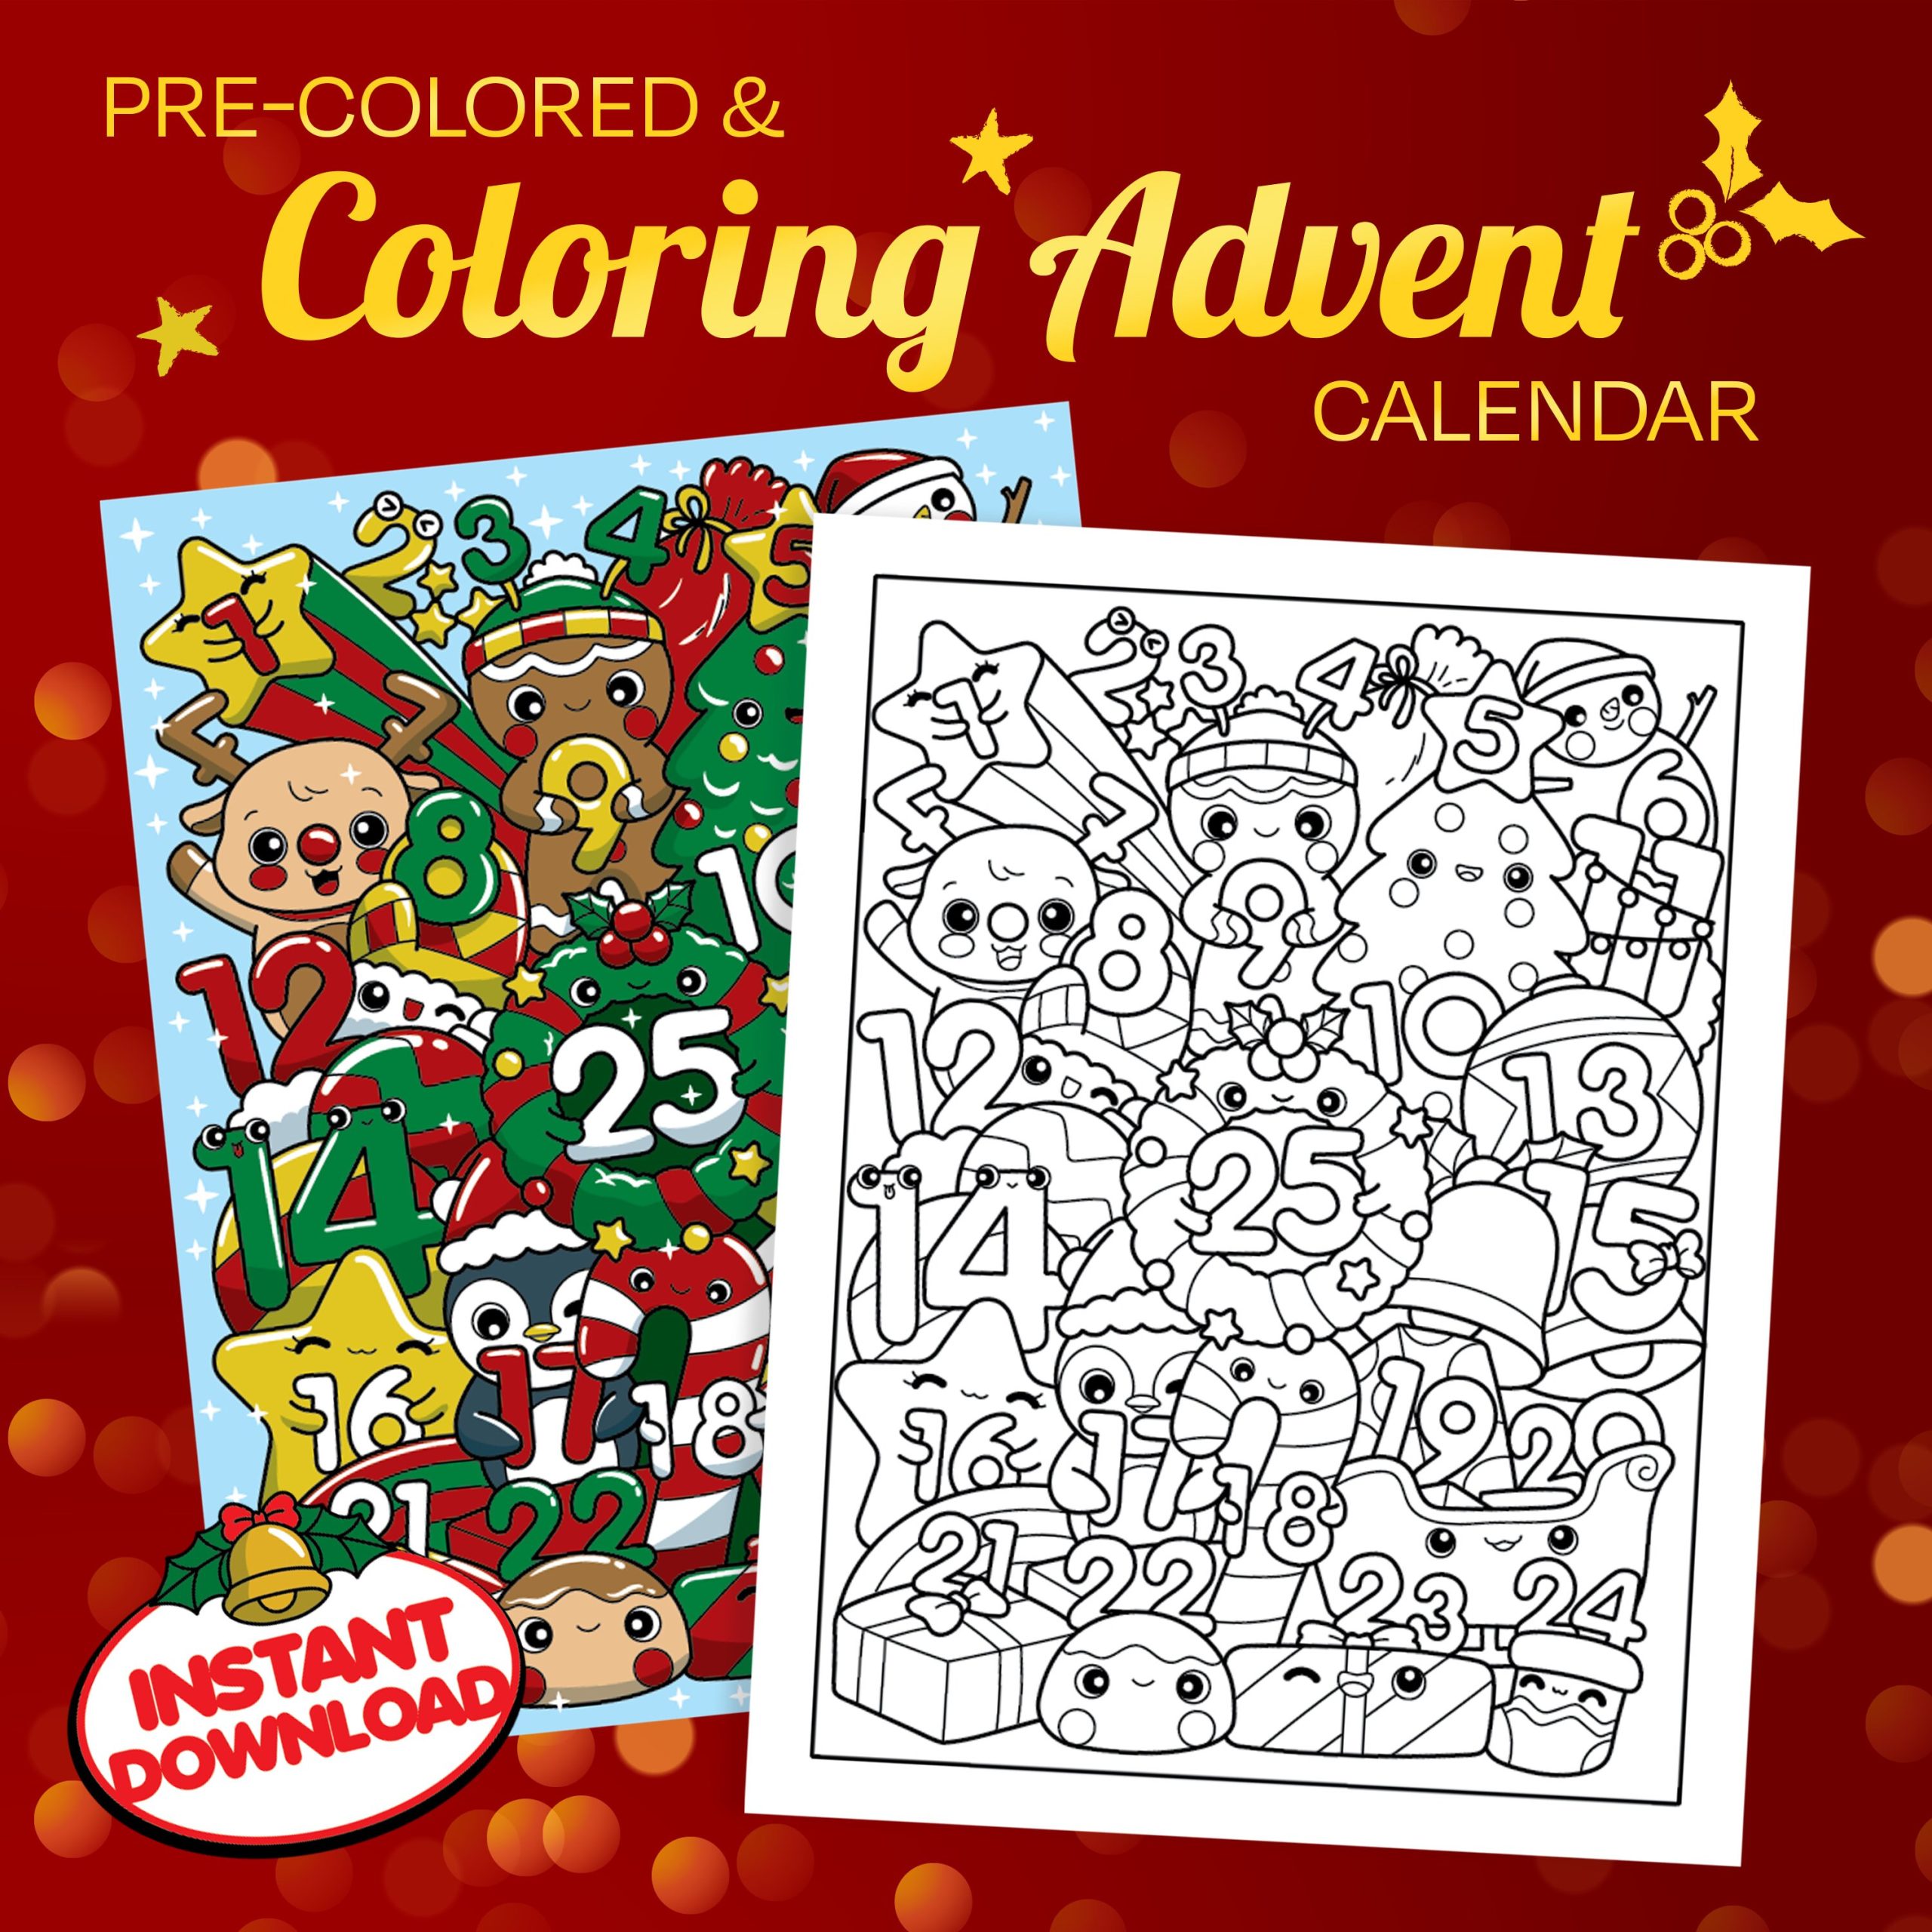 Coloring Christmas Advent Calendar with Kawaii Doodles, Instant Download Printable PDF, Countdown December Holiday Festive Color Page